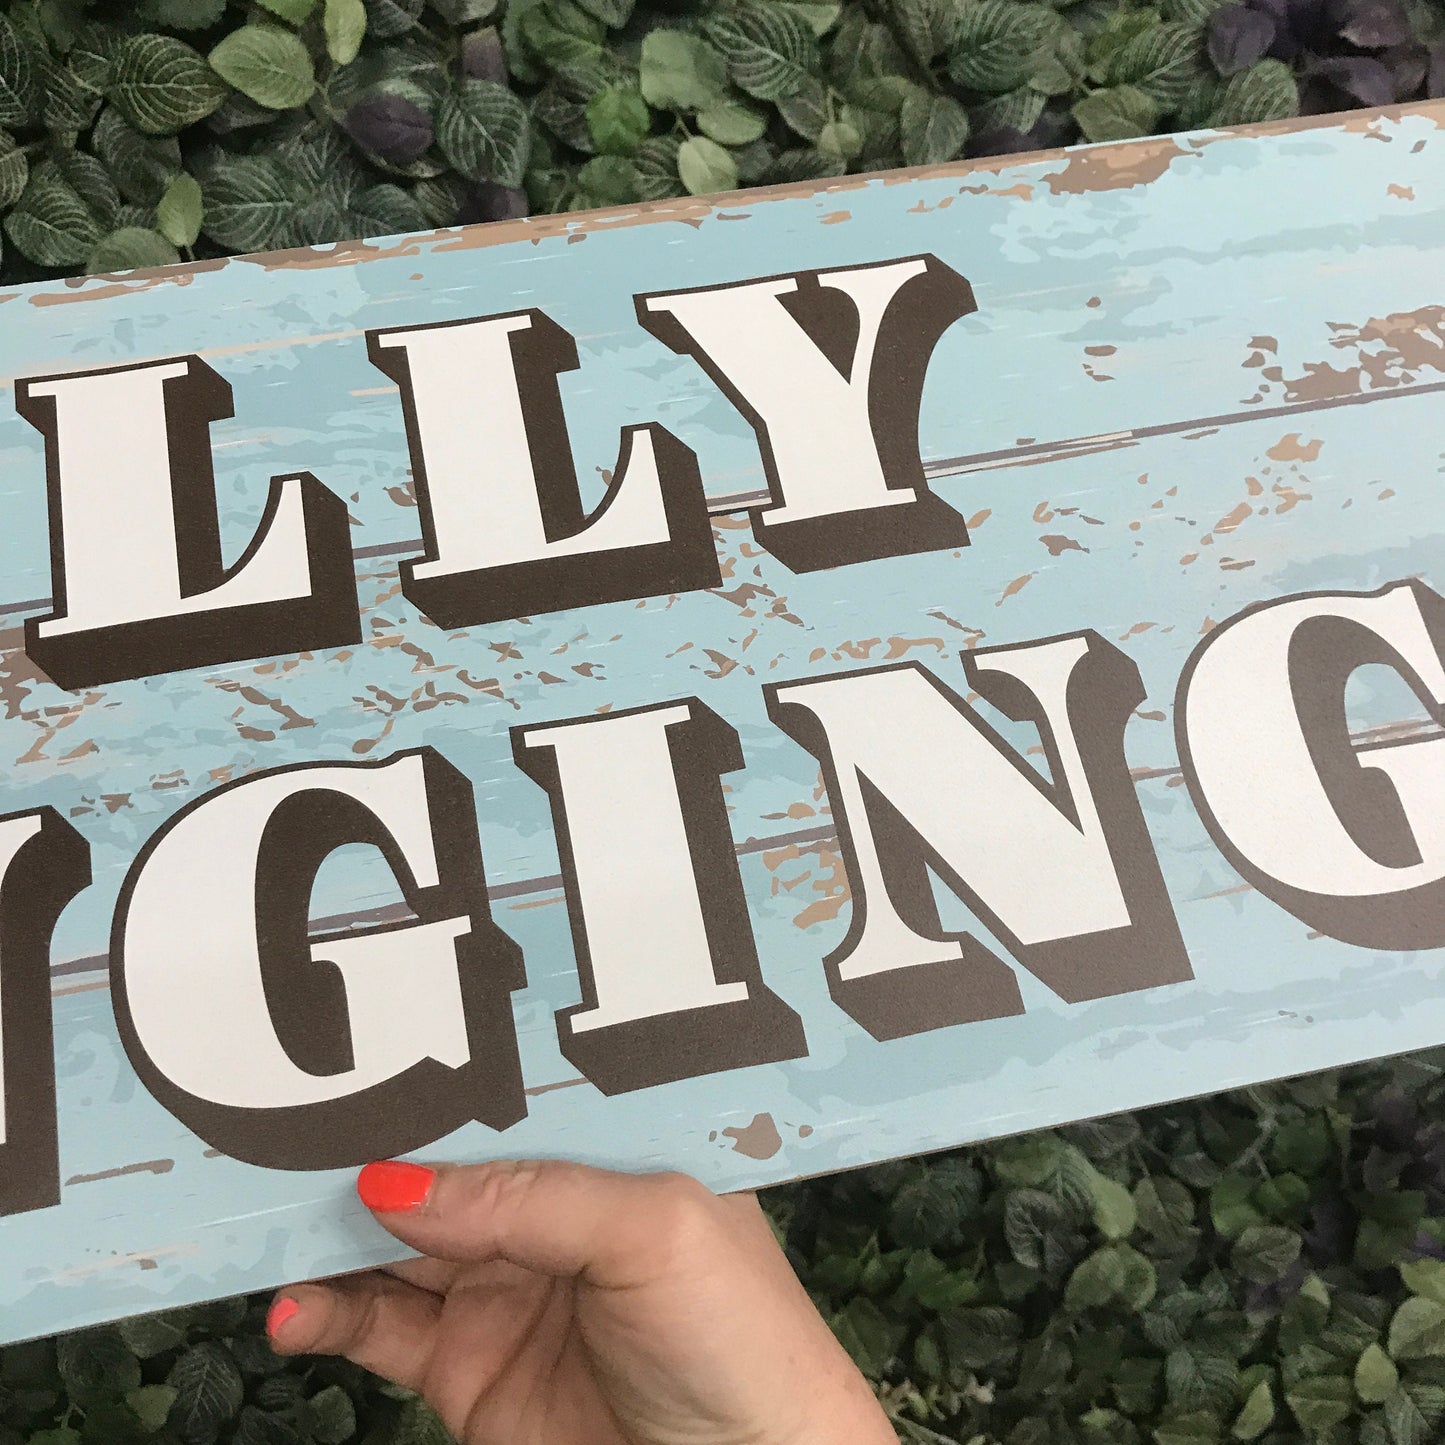 Welly Wanging Sign